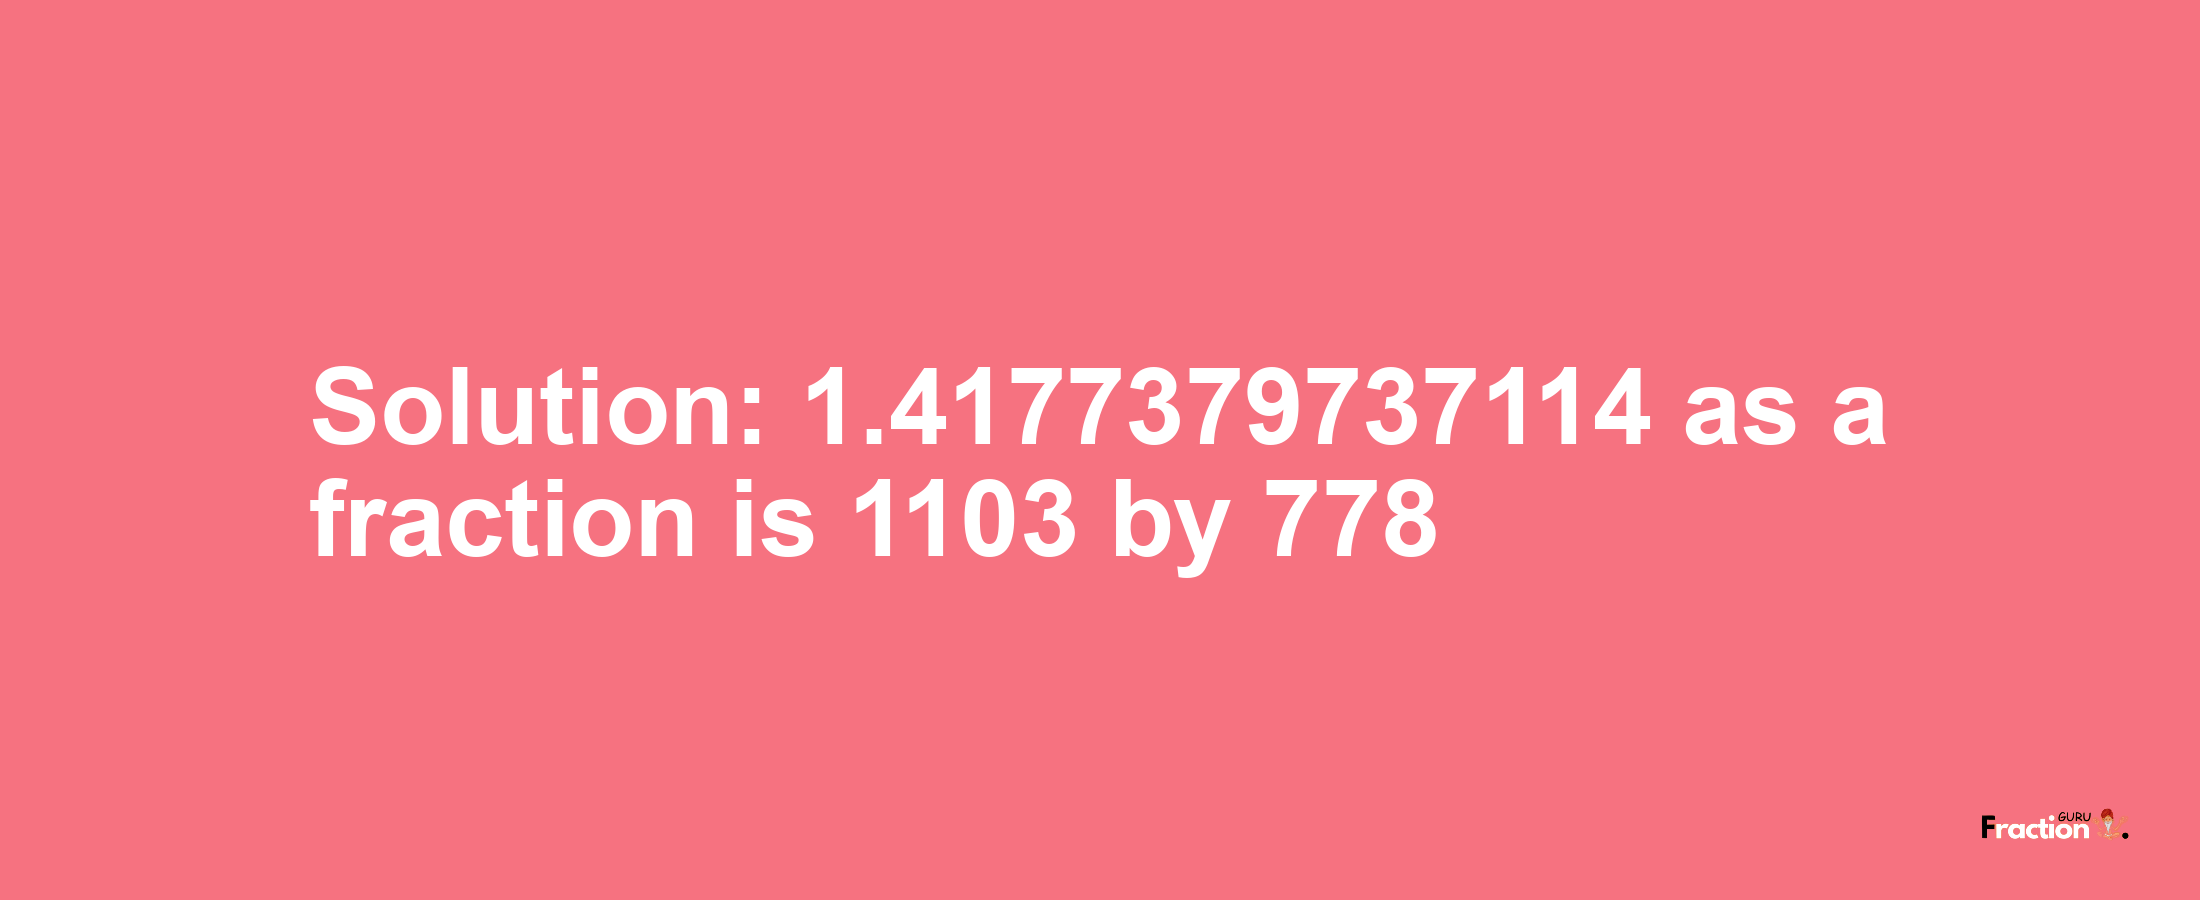 Solution:1.4177379737114 as a fraction is 1103/778